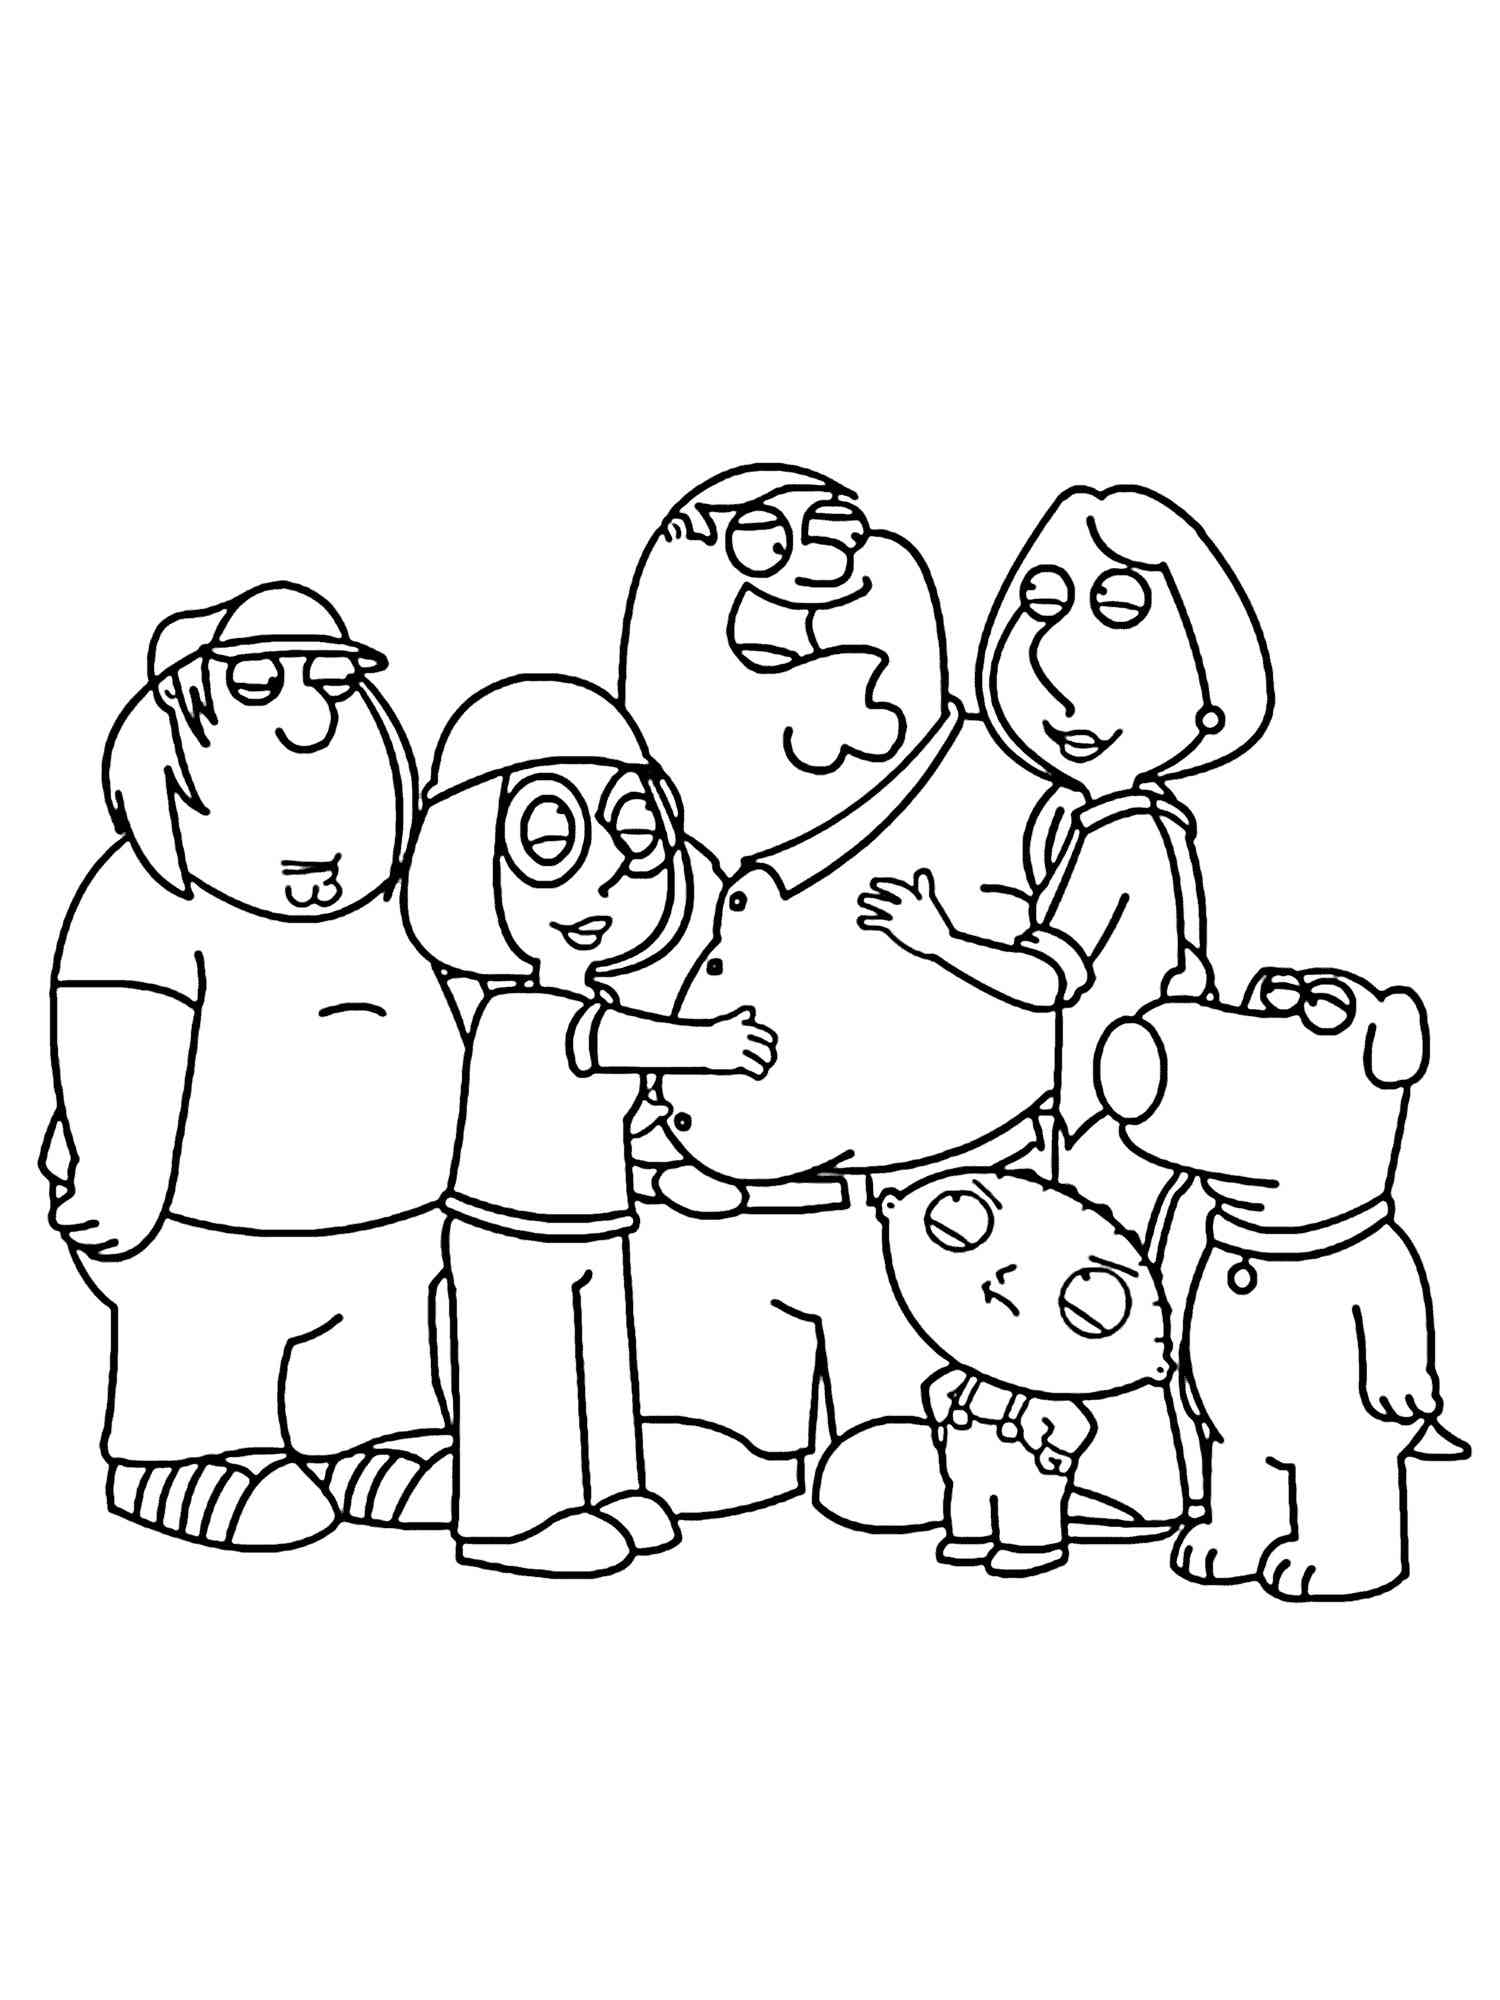 Family Guy 21 coloring page